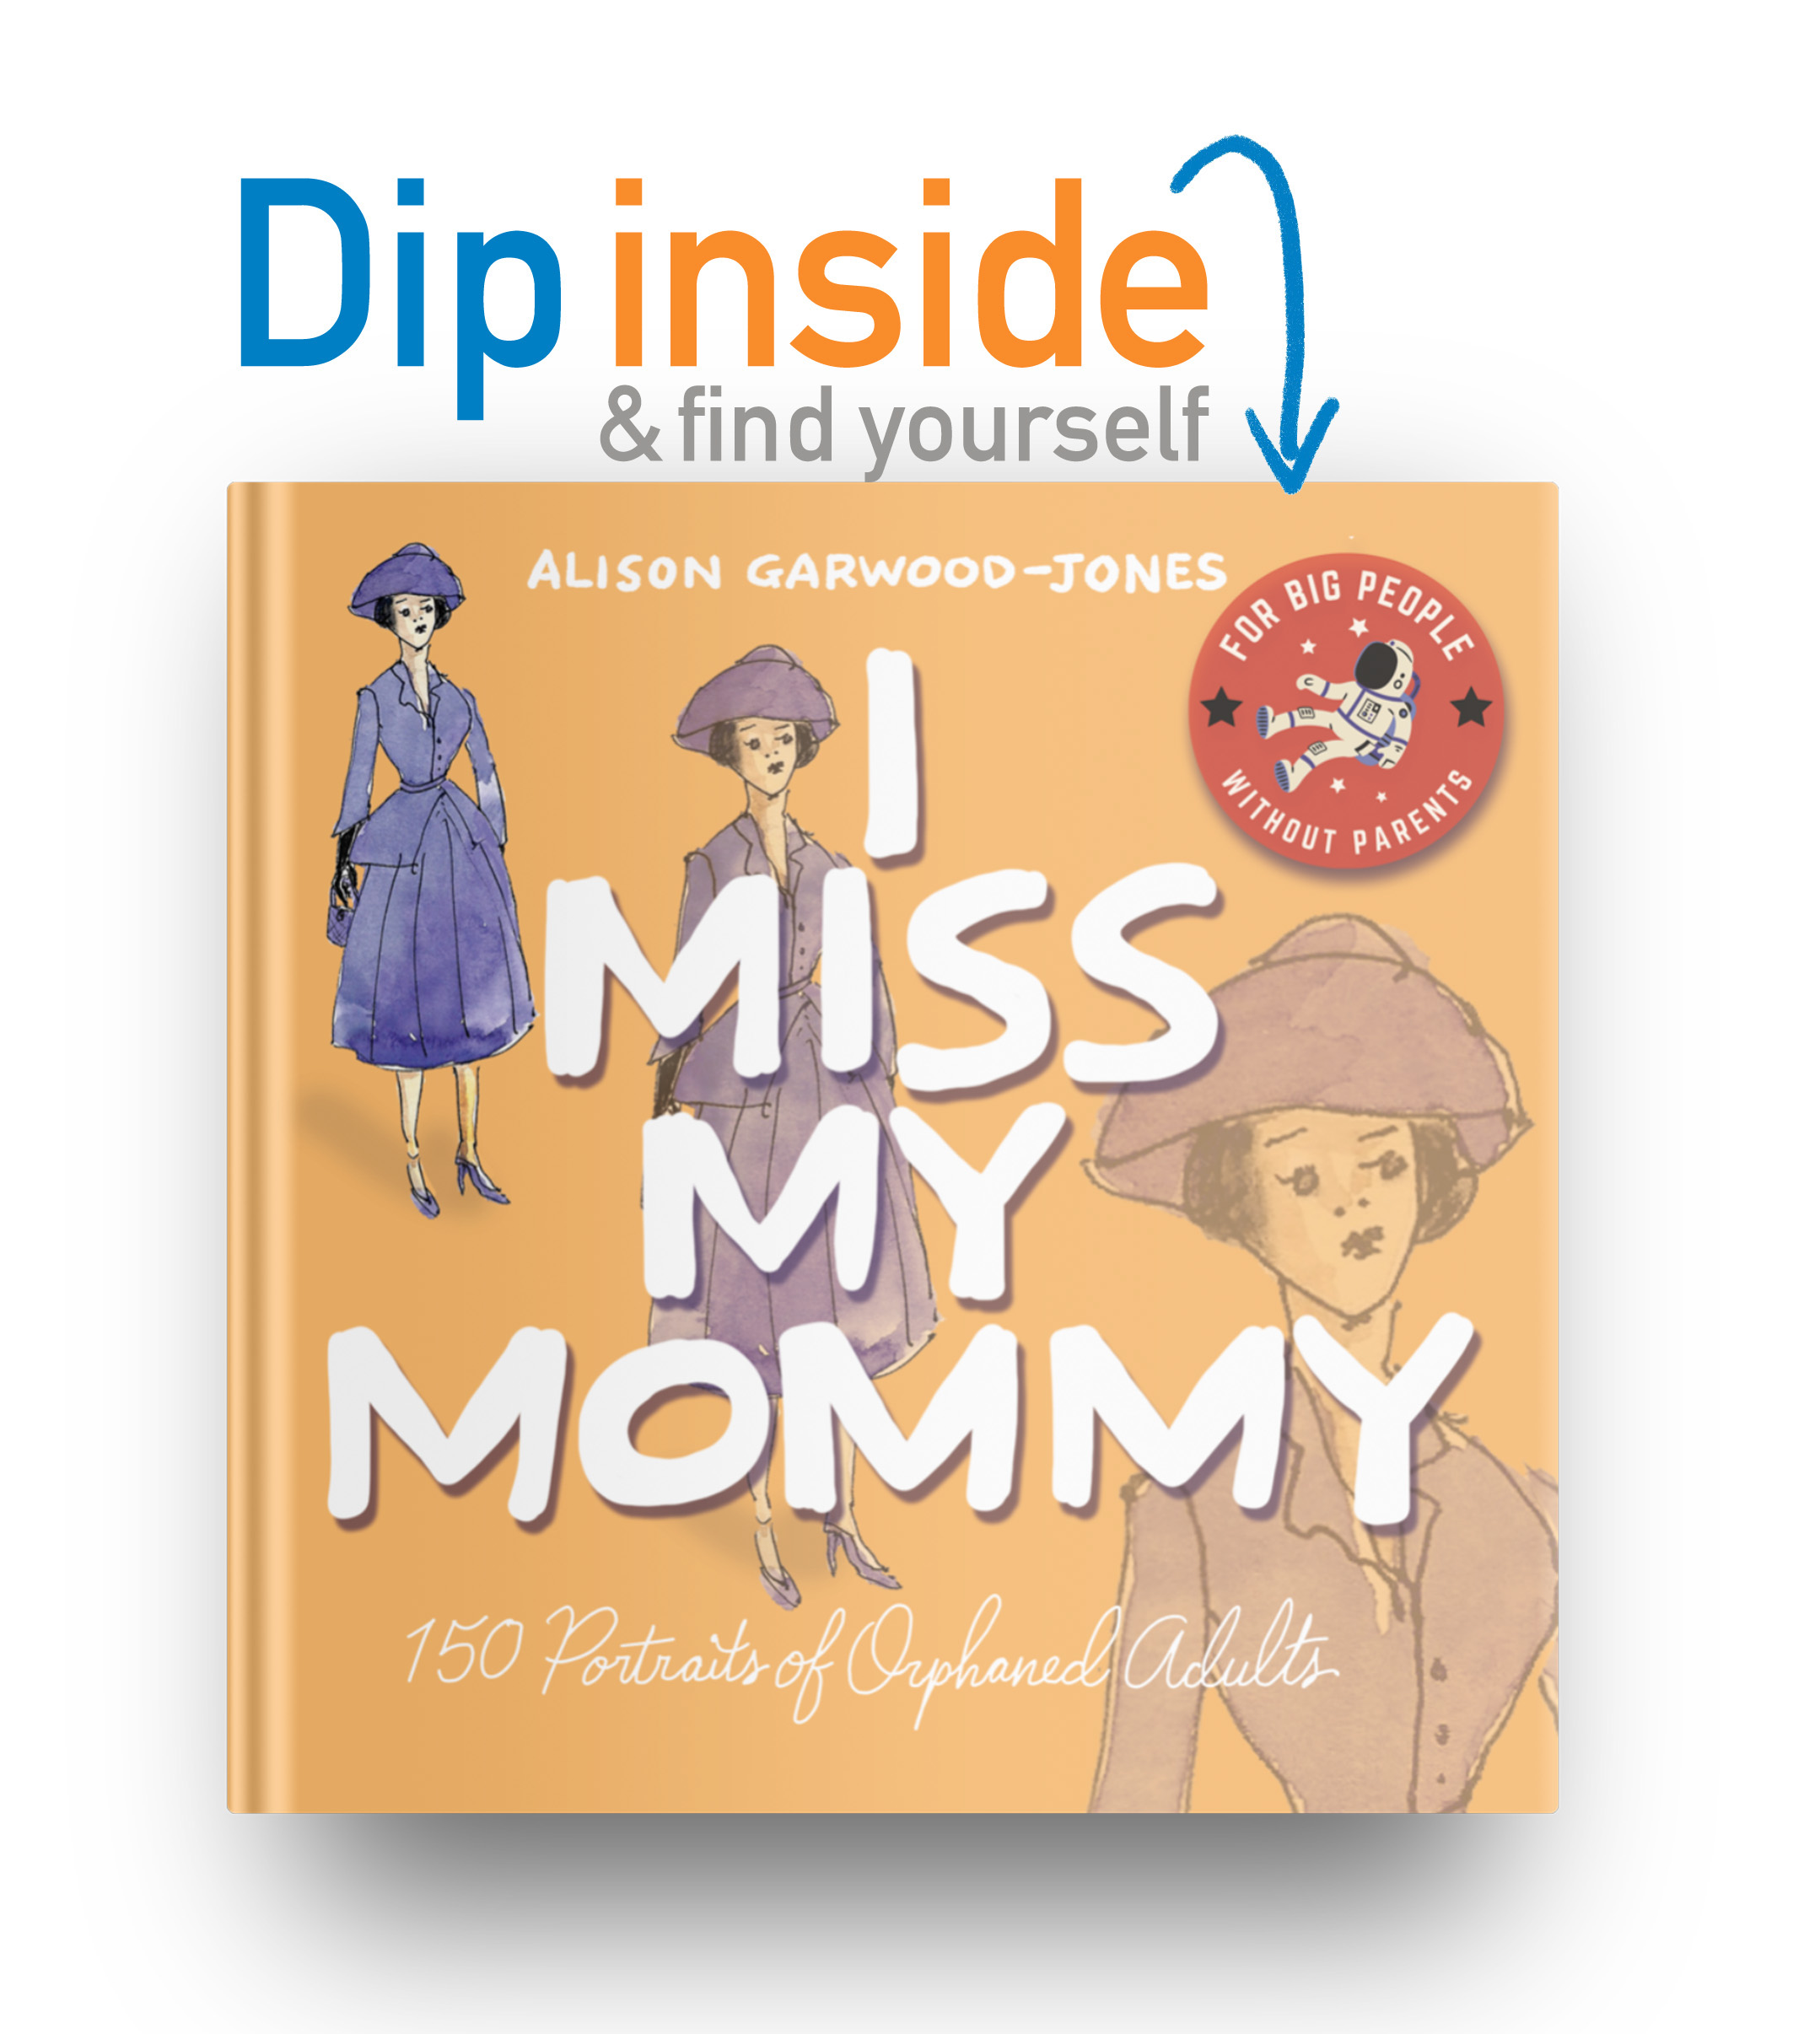 "Book cover for 'I Miss My Mommy' depicting stages of grief in orphaned adults" by Alison Garwood-Jones